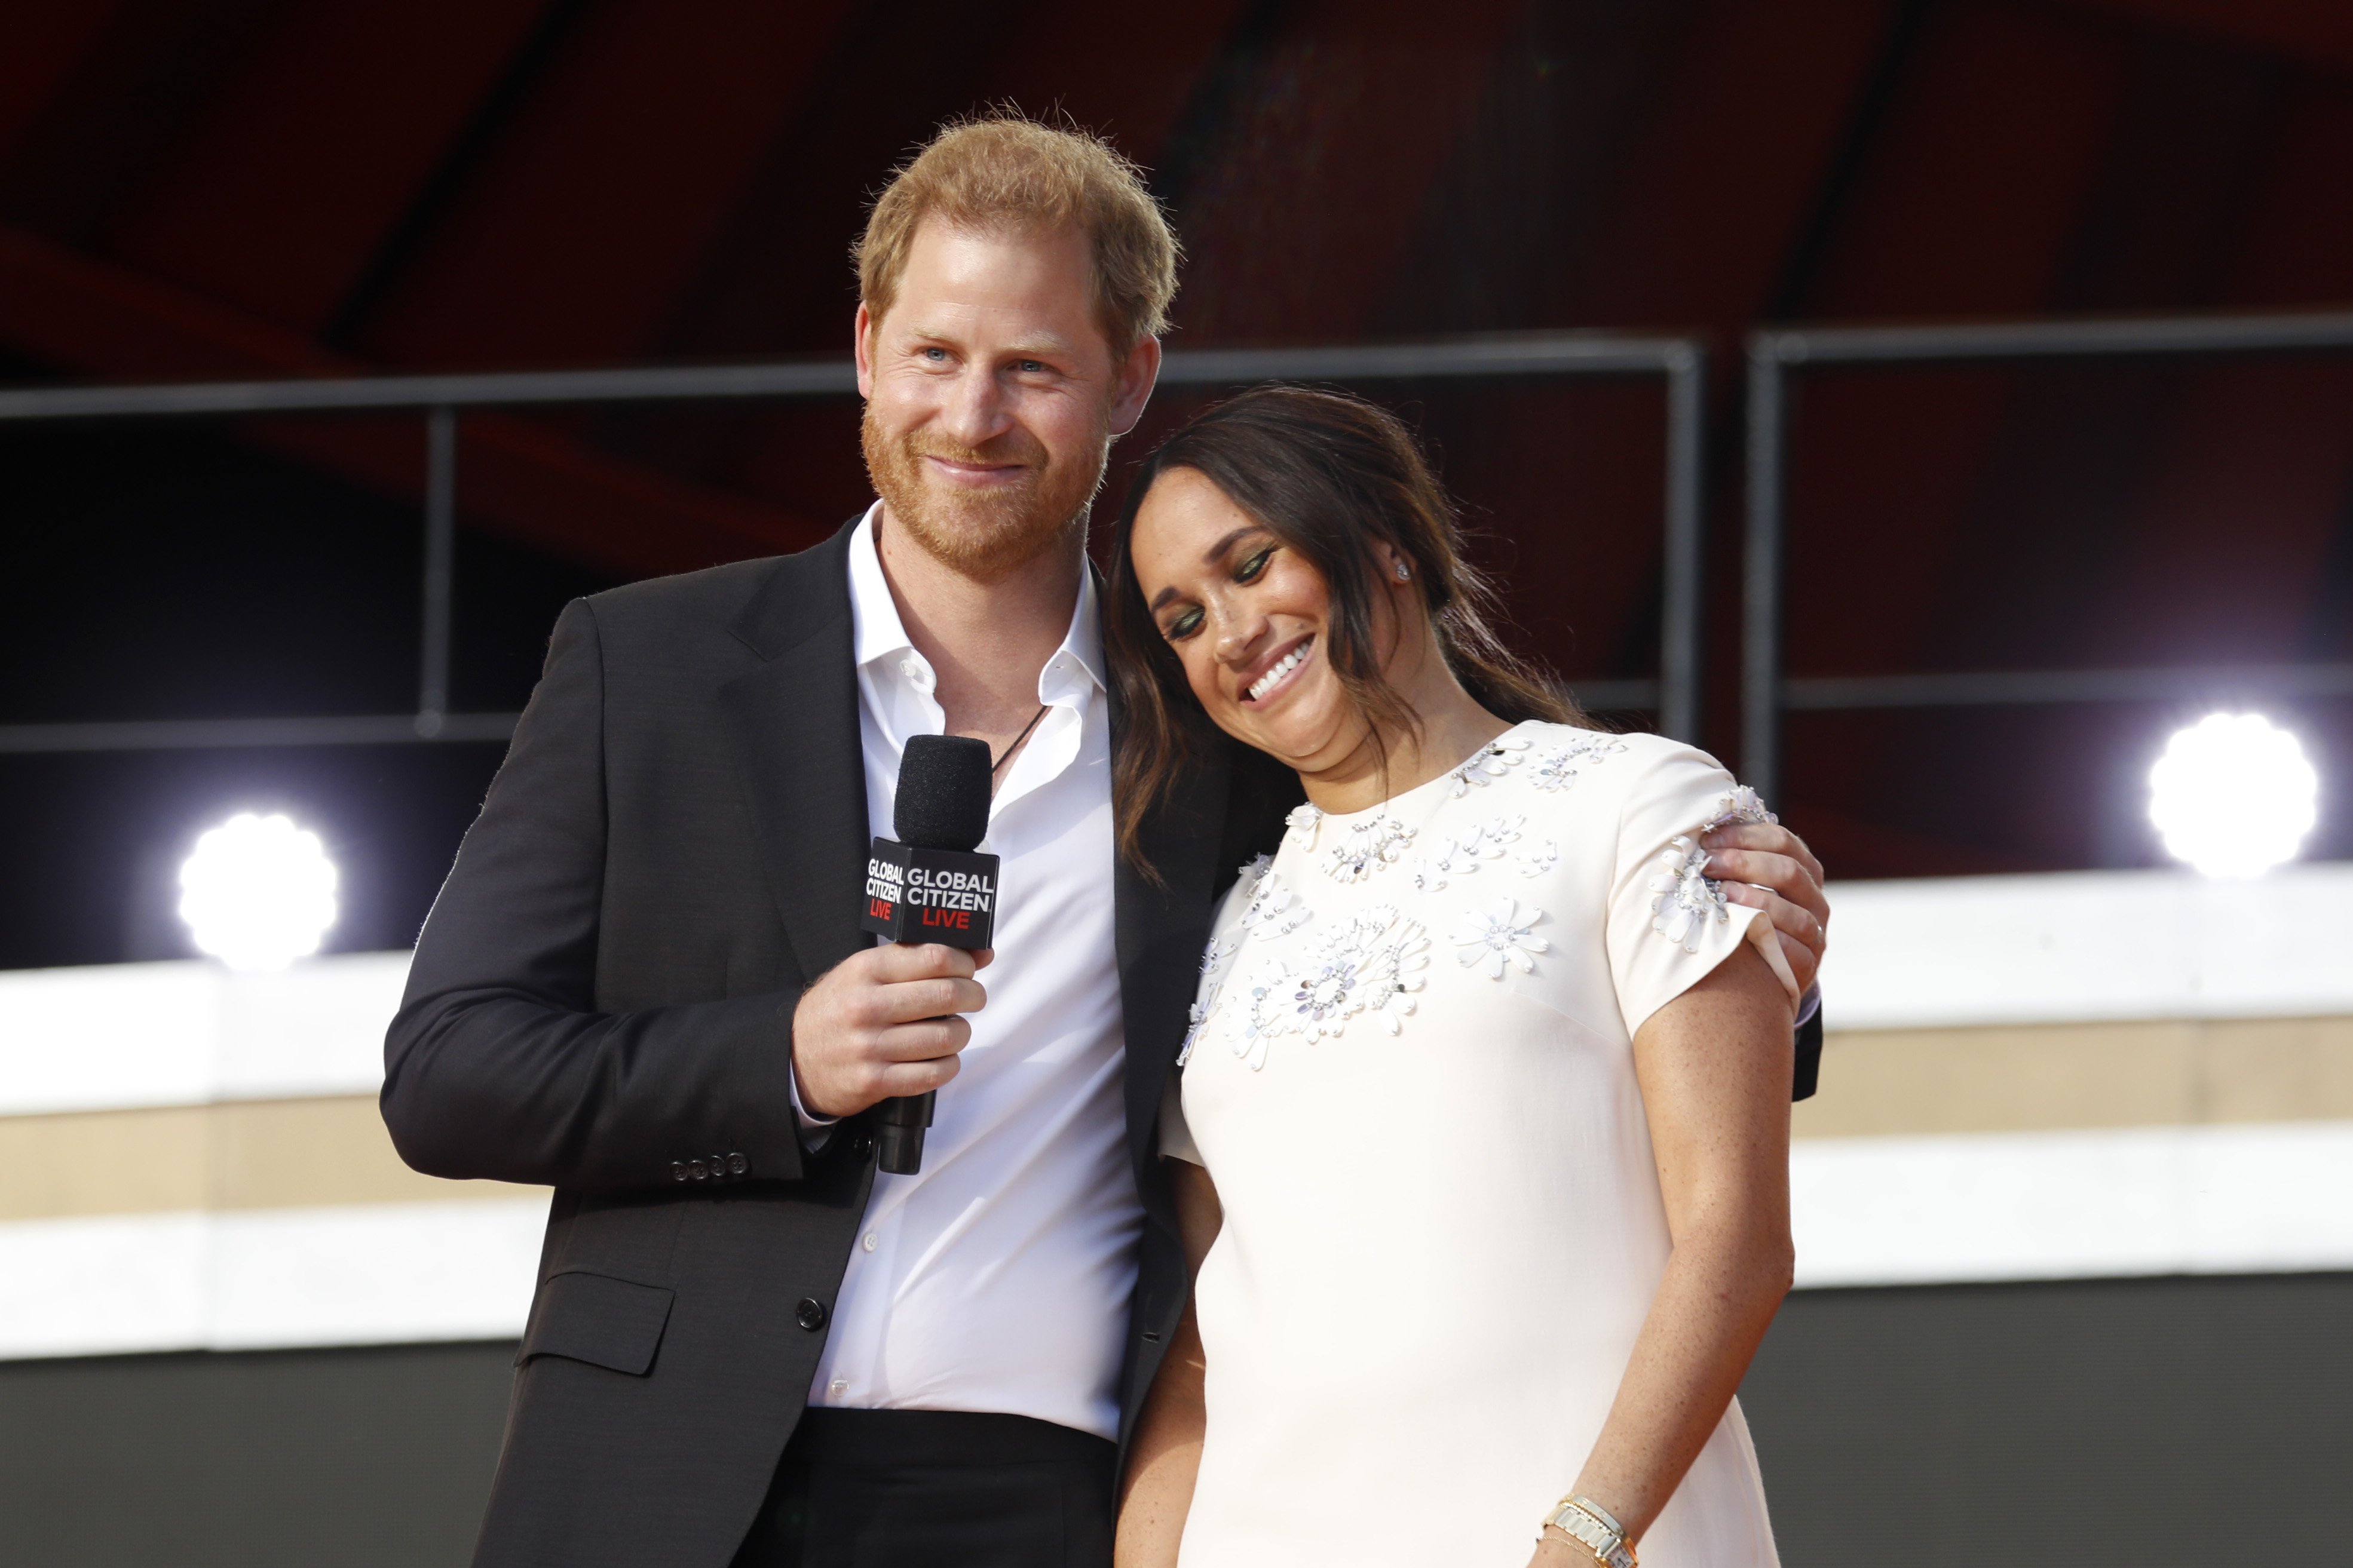 Prince Harry, Duke of Sussex and Meghan, Duchess of Sussex speak onstage during Global Citizen Live, New York on September 25, 2021 in New York City. | Source: Getty Images